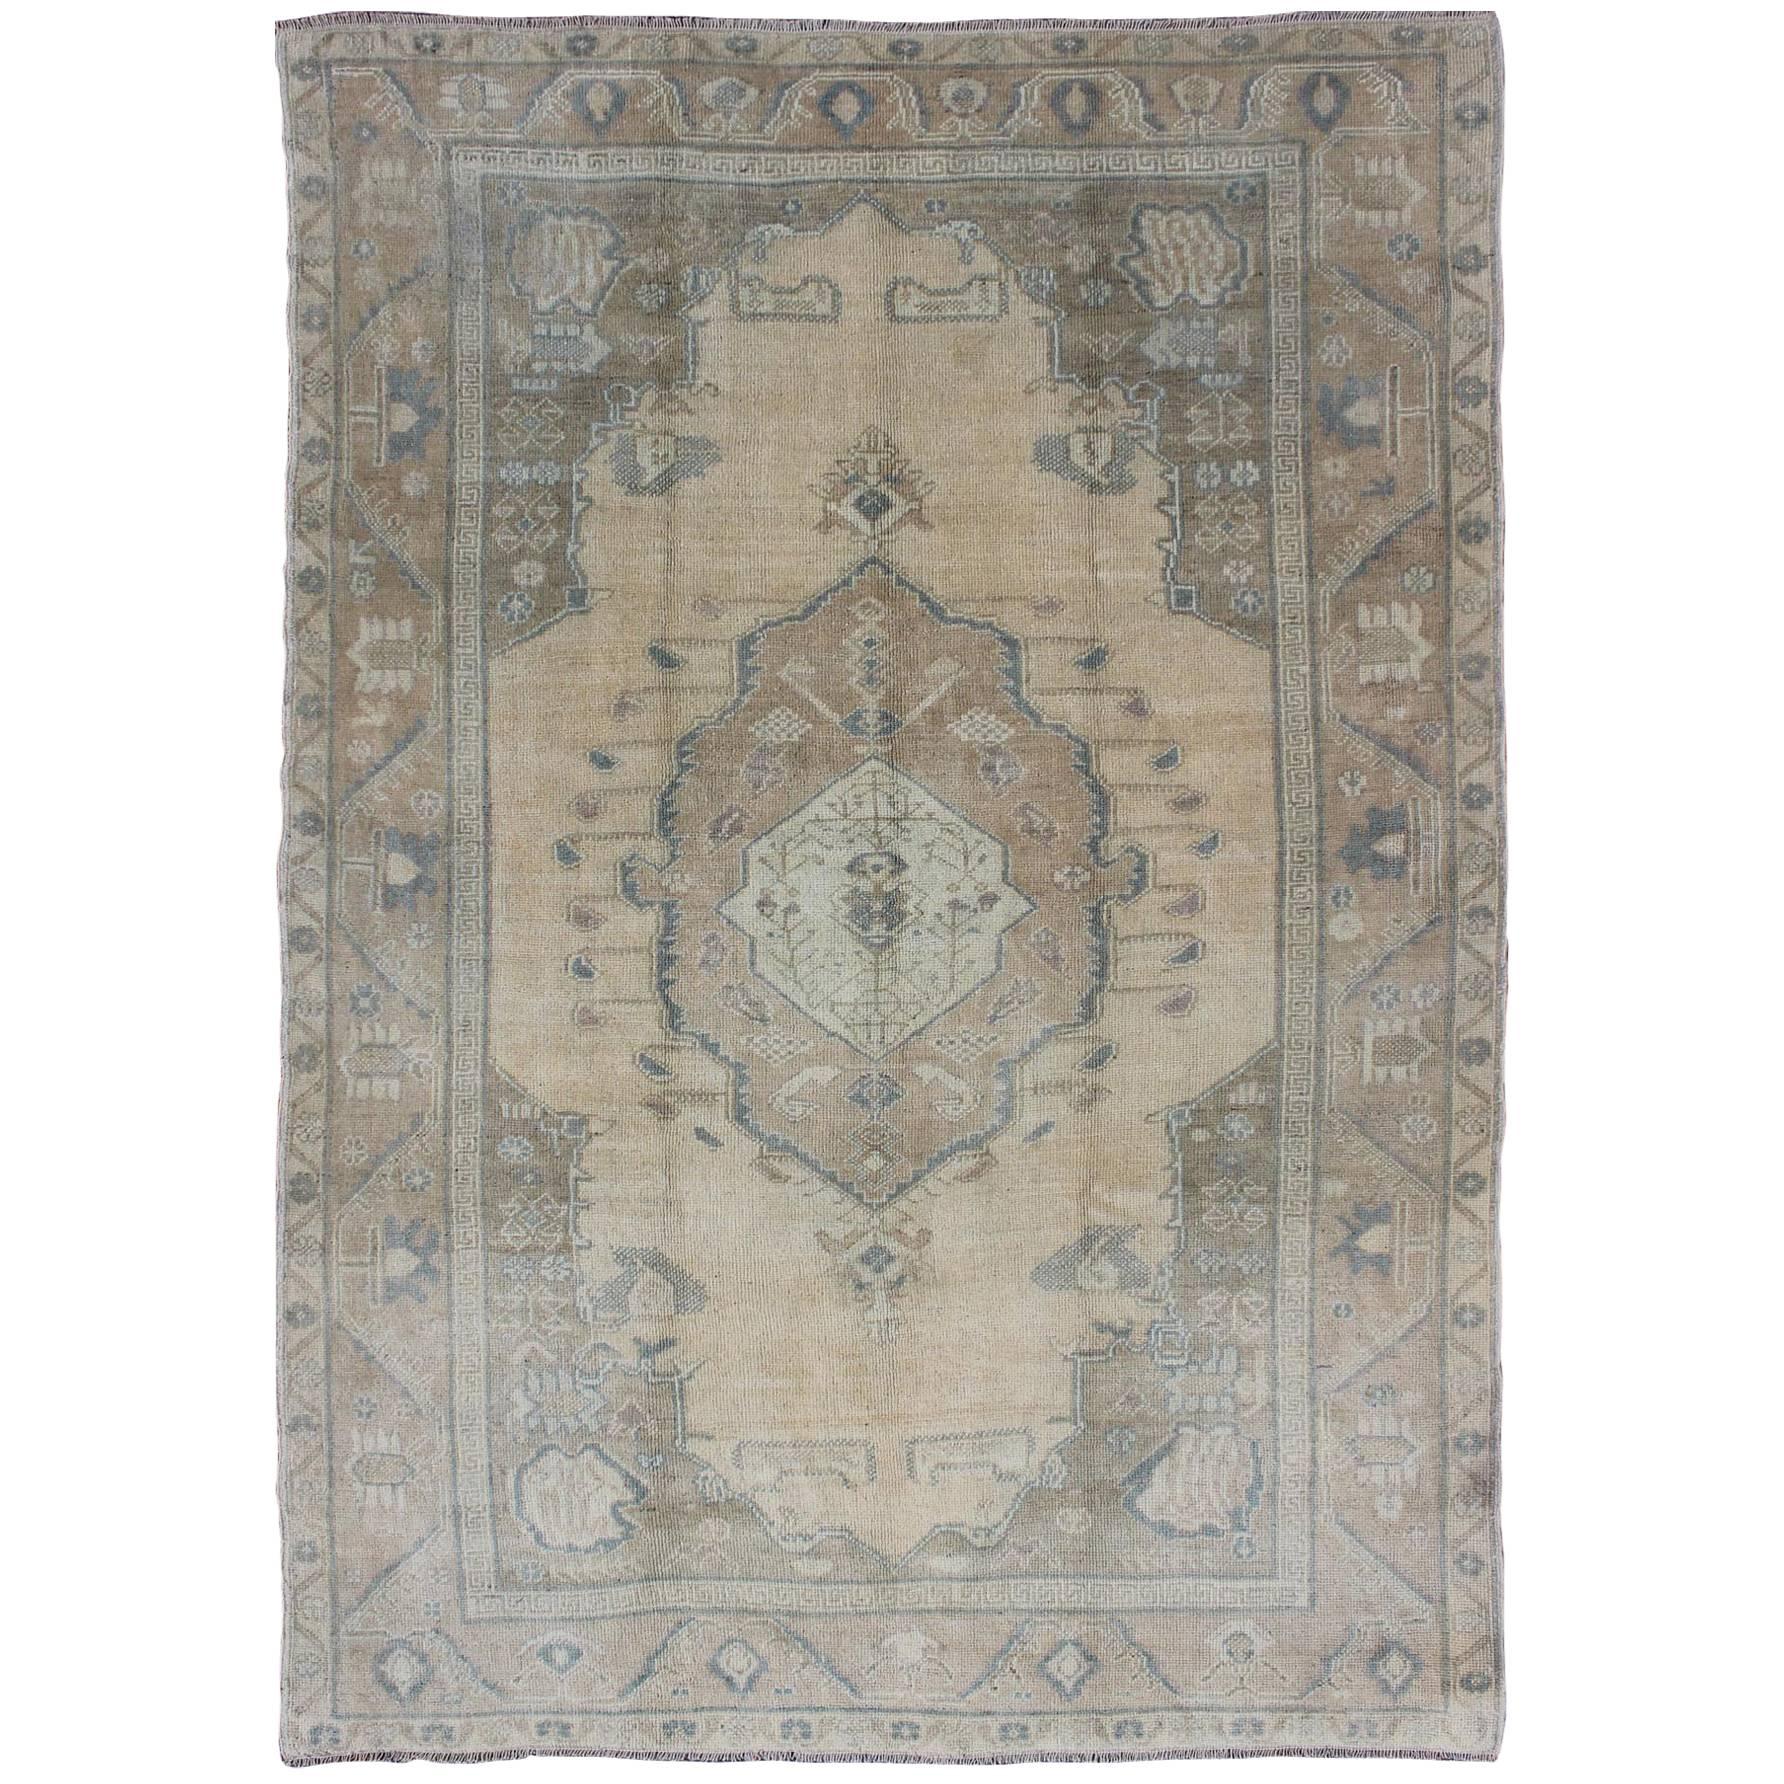 Vintage Turkish Oushak Rug with Tribal Medallion in Ivory, Camel, and Gray